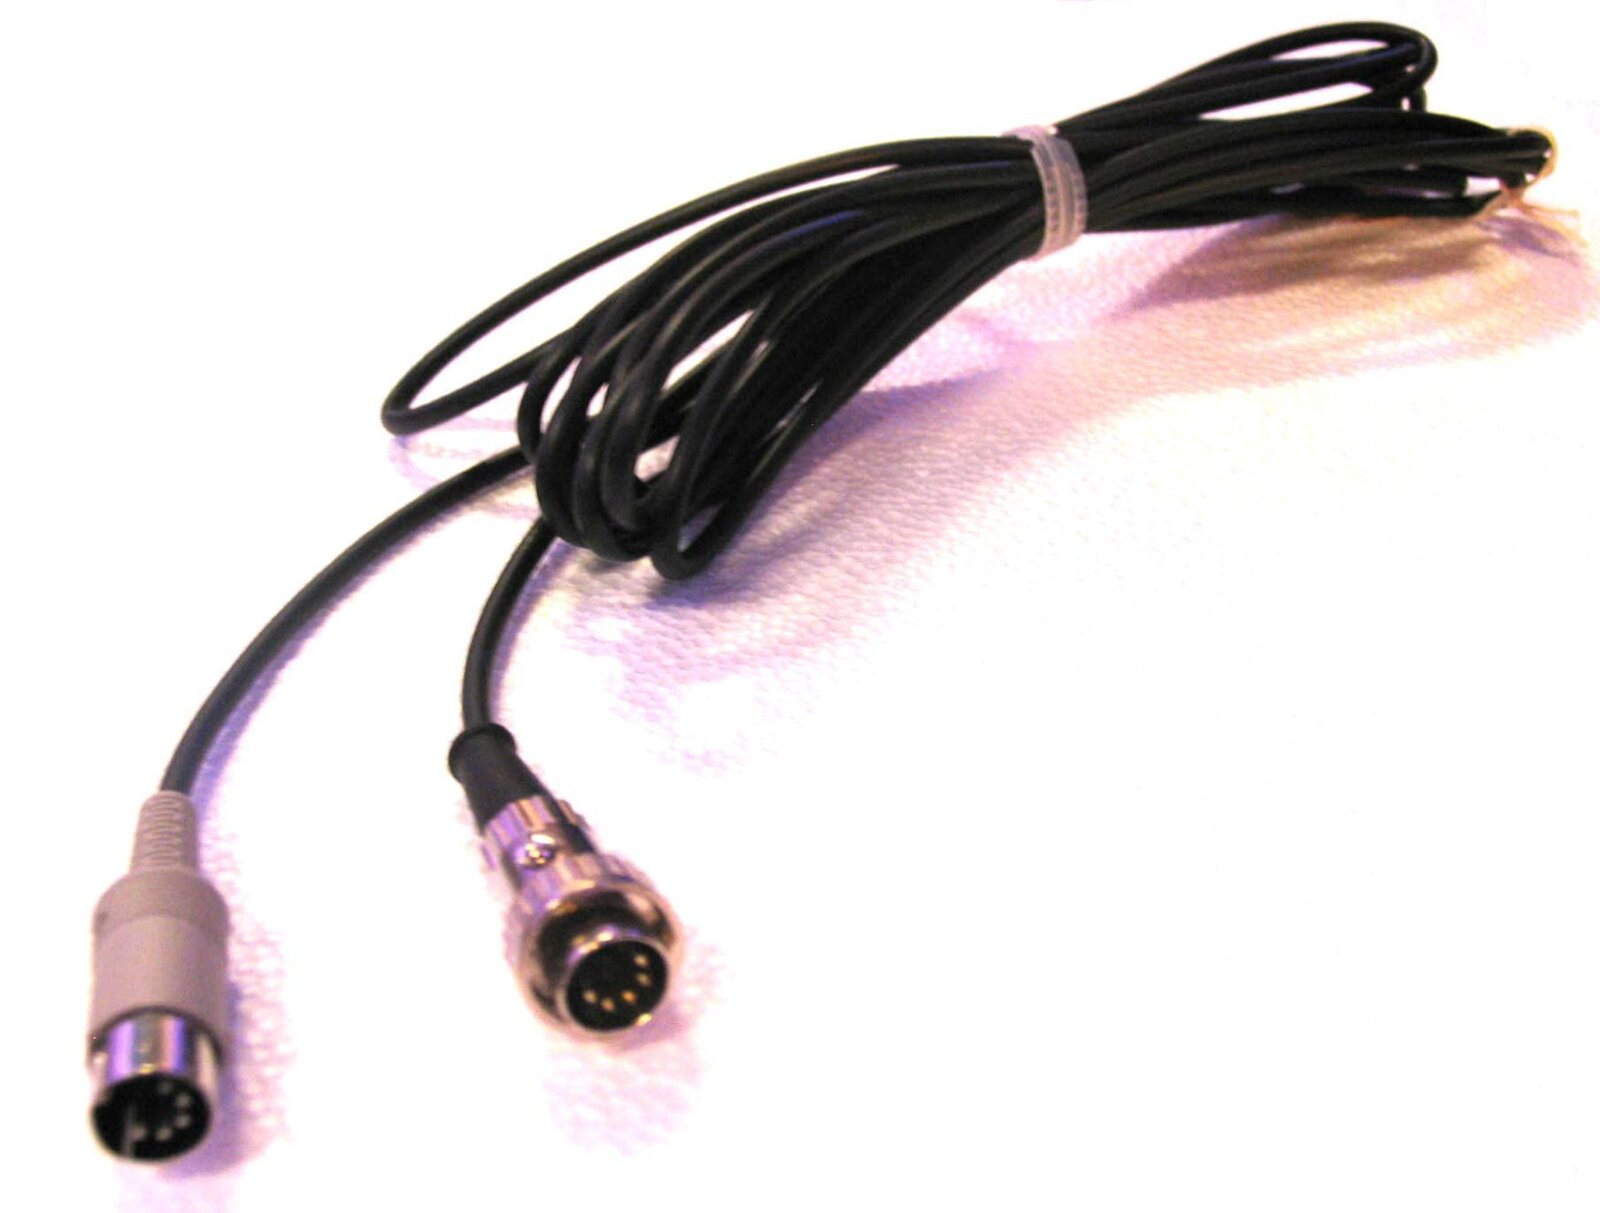 Cavagnolo Special midi cable for Digit 5 m : photo 1